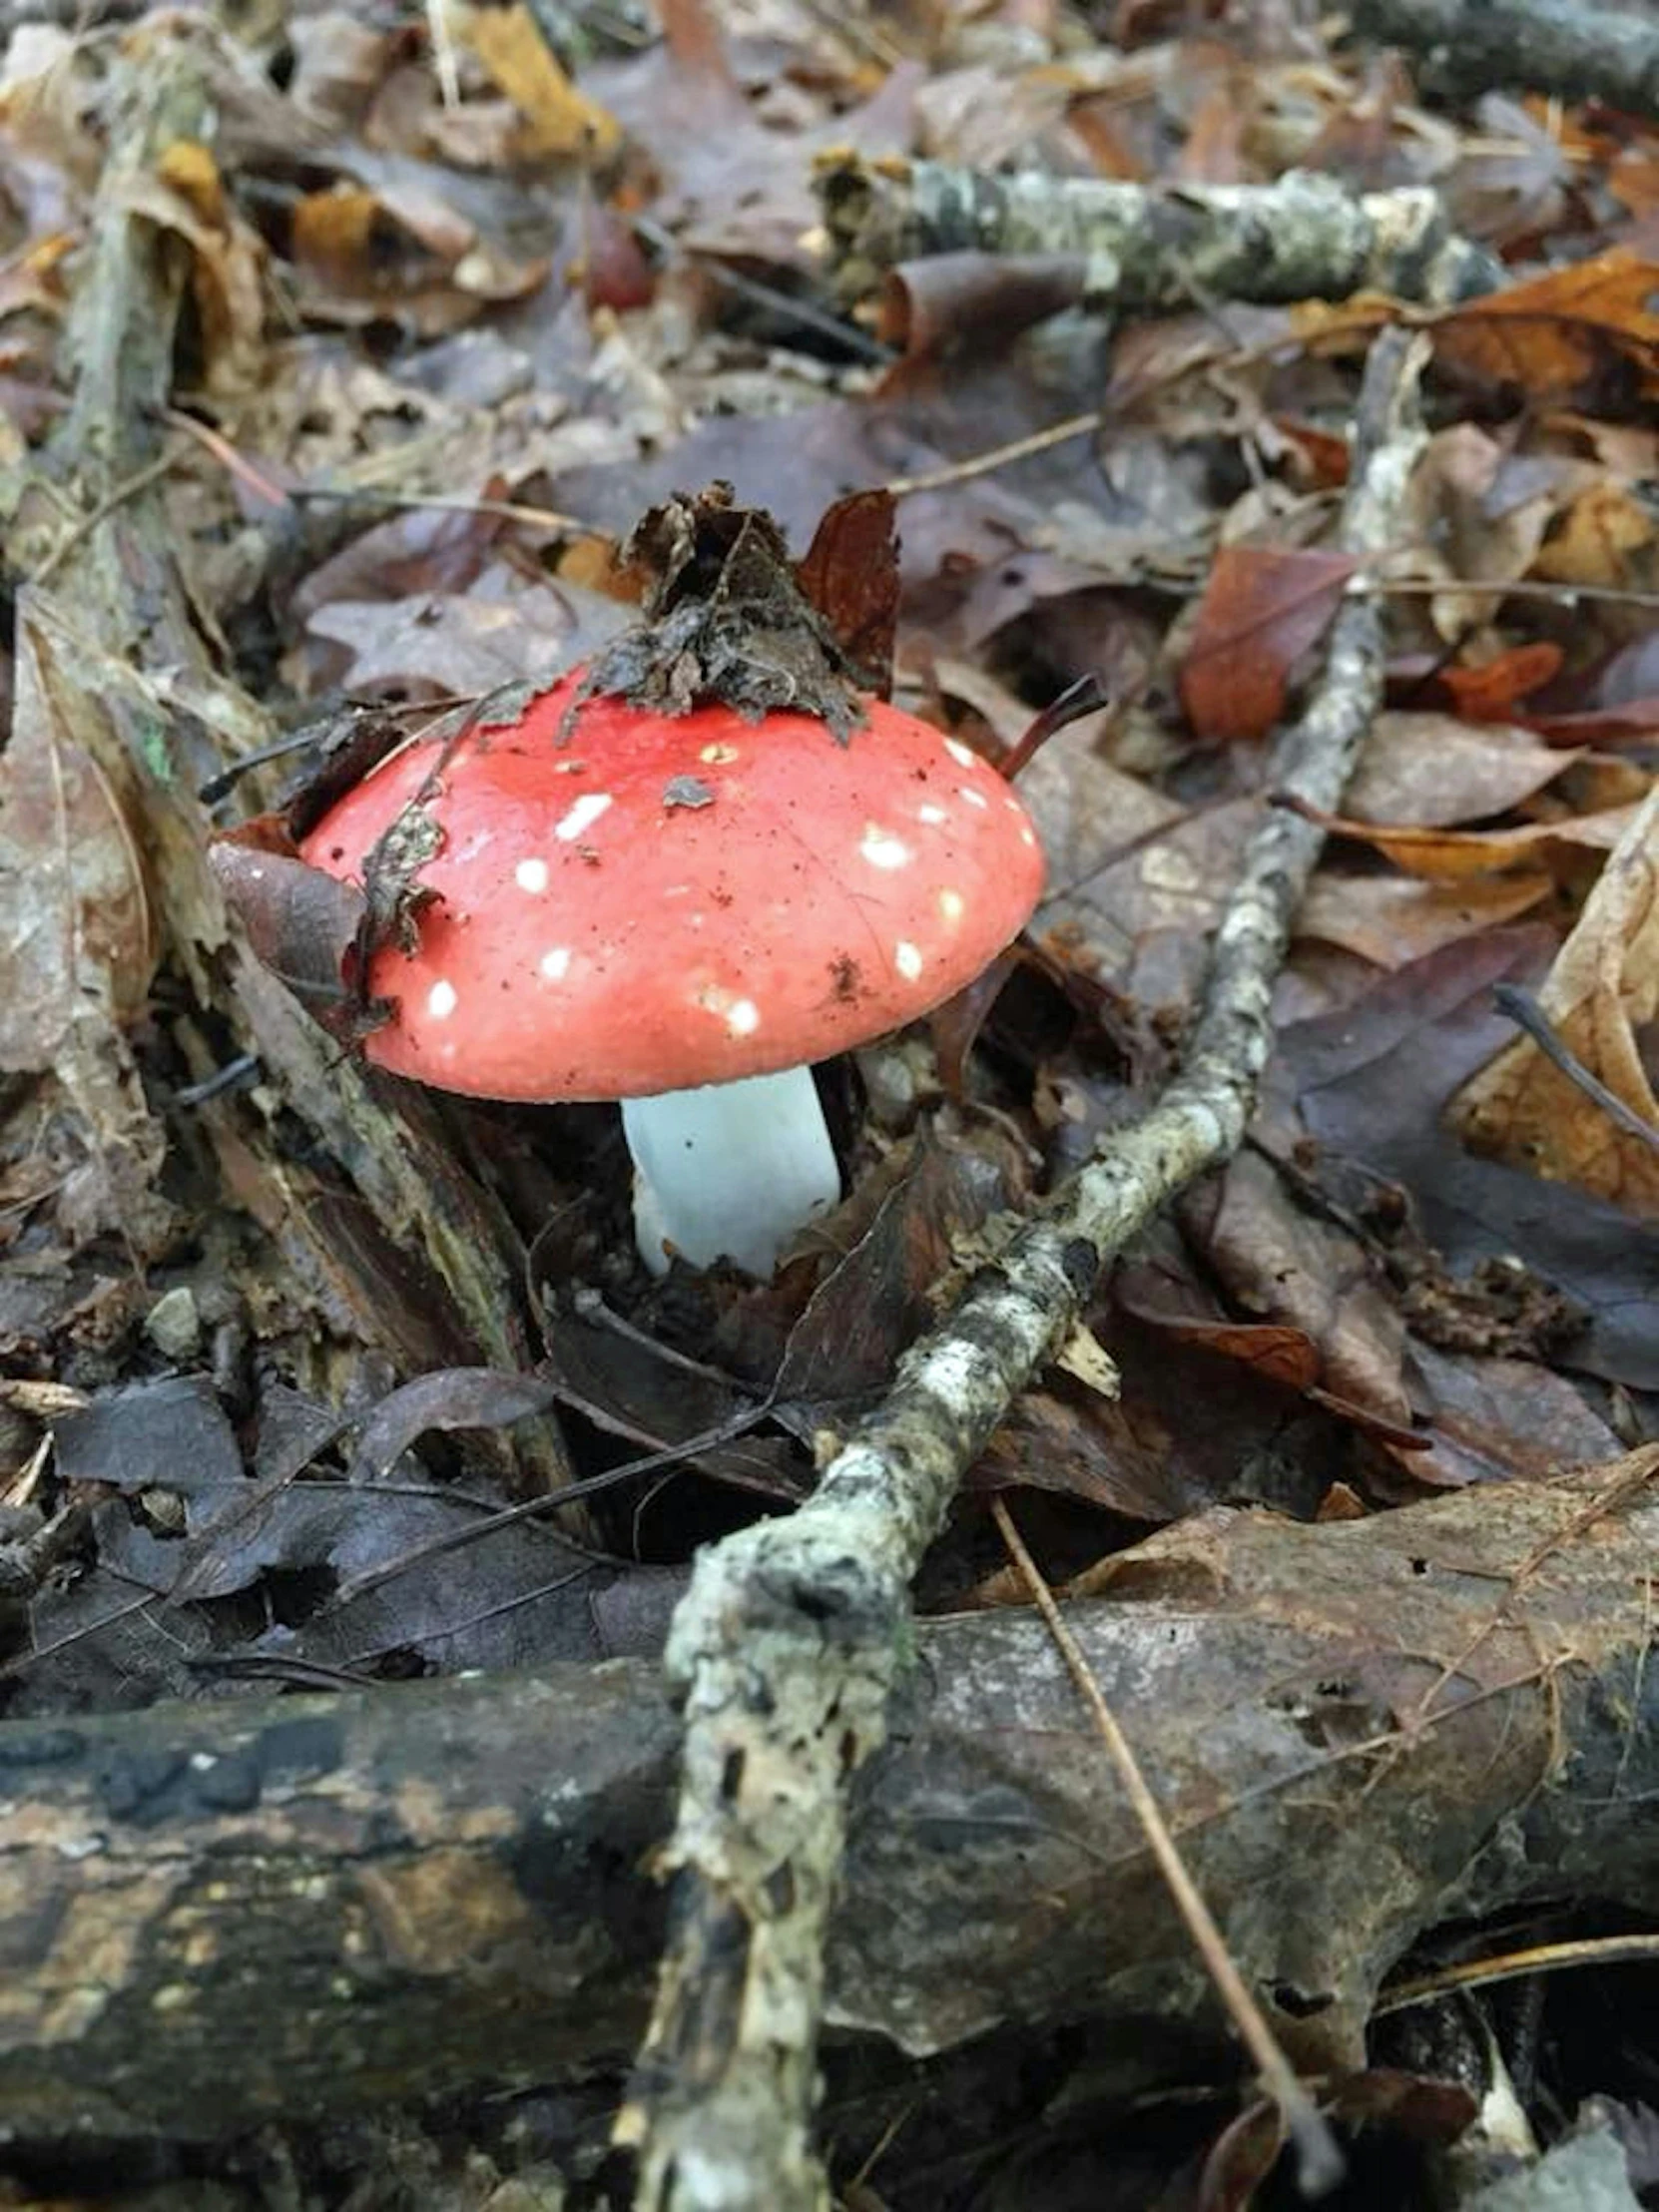 there is a red mushroom sitting on the leaves